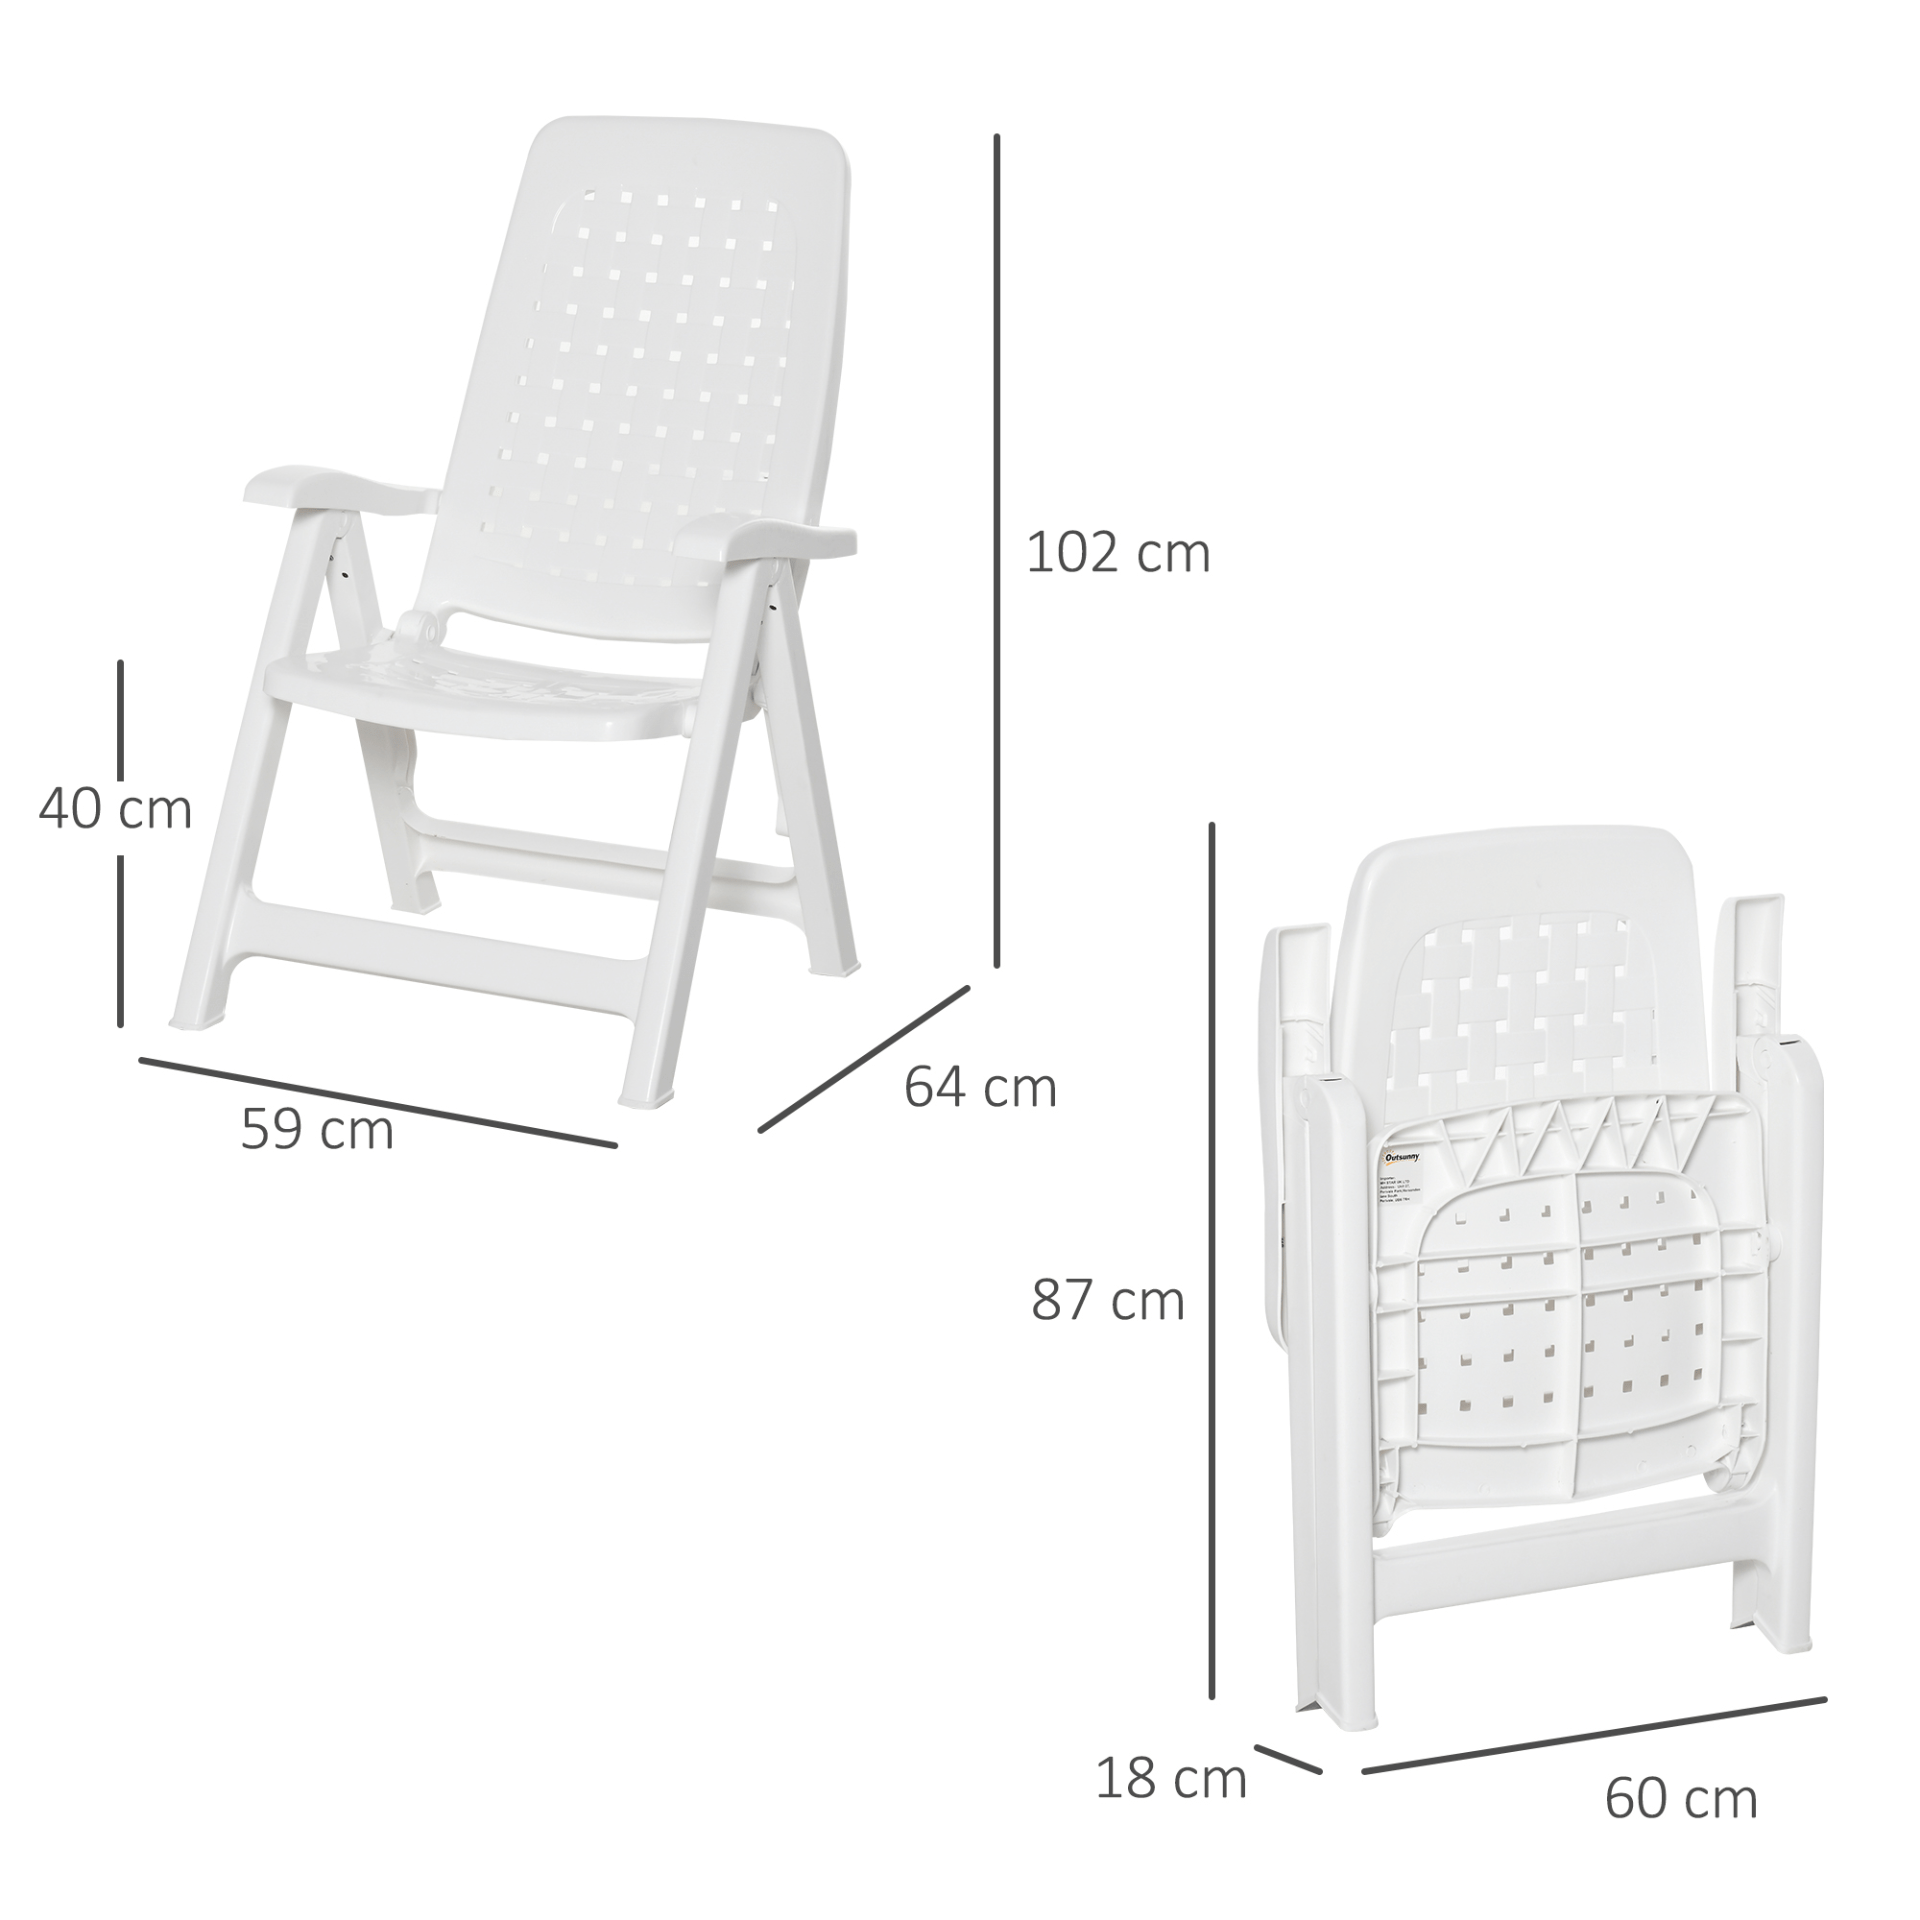 Outsunny Set of 2 Folding Plastic Dining Chairs - 4-Position Backrest, Reclining Armchairs for Indoor & Outdoor Events, Camping - White Camping Chair Cosy Camping Co.   